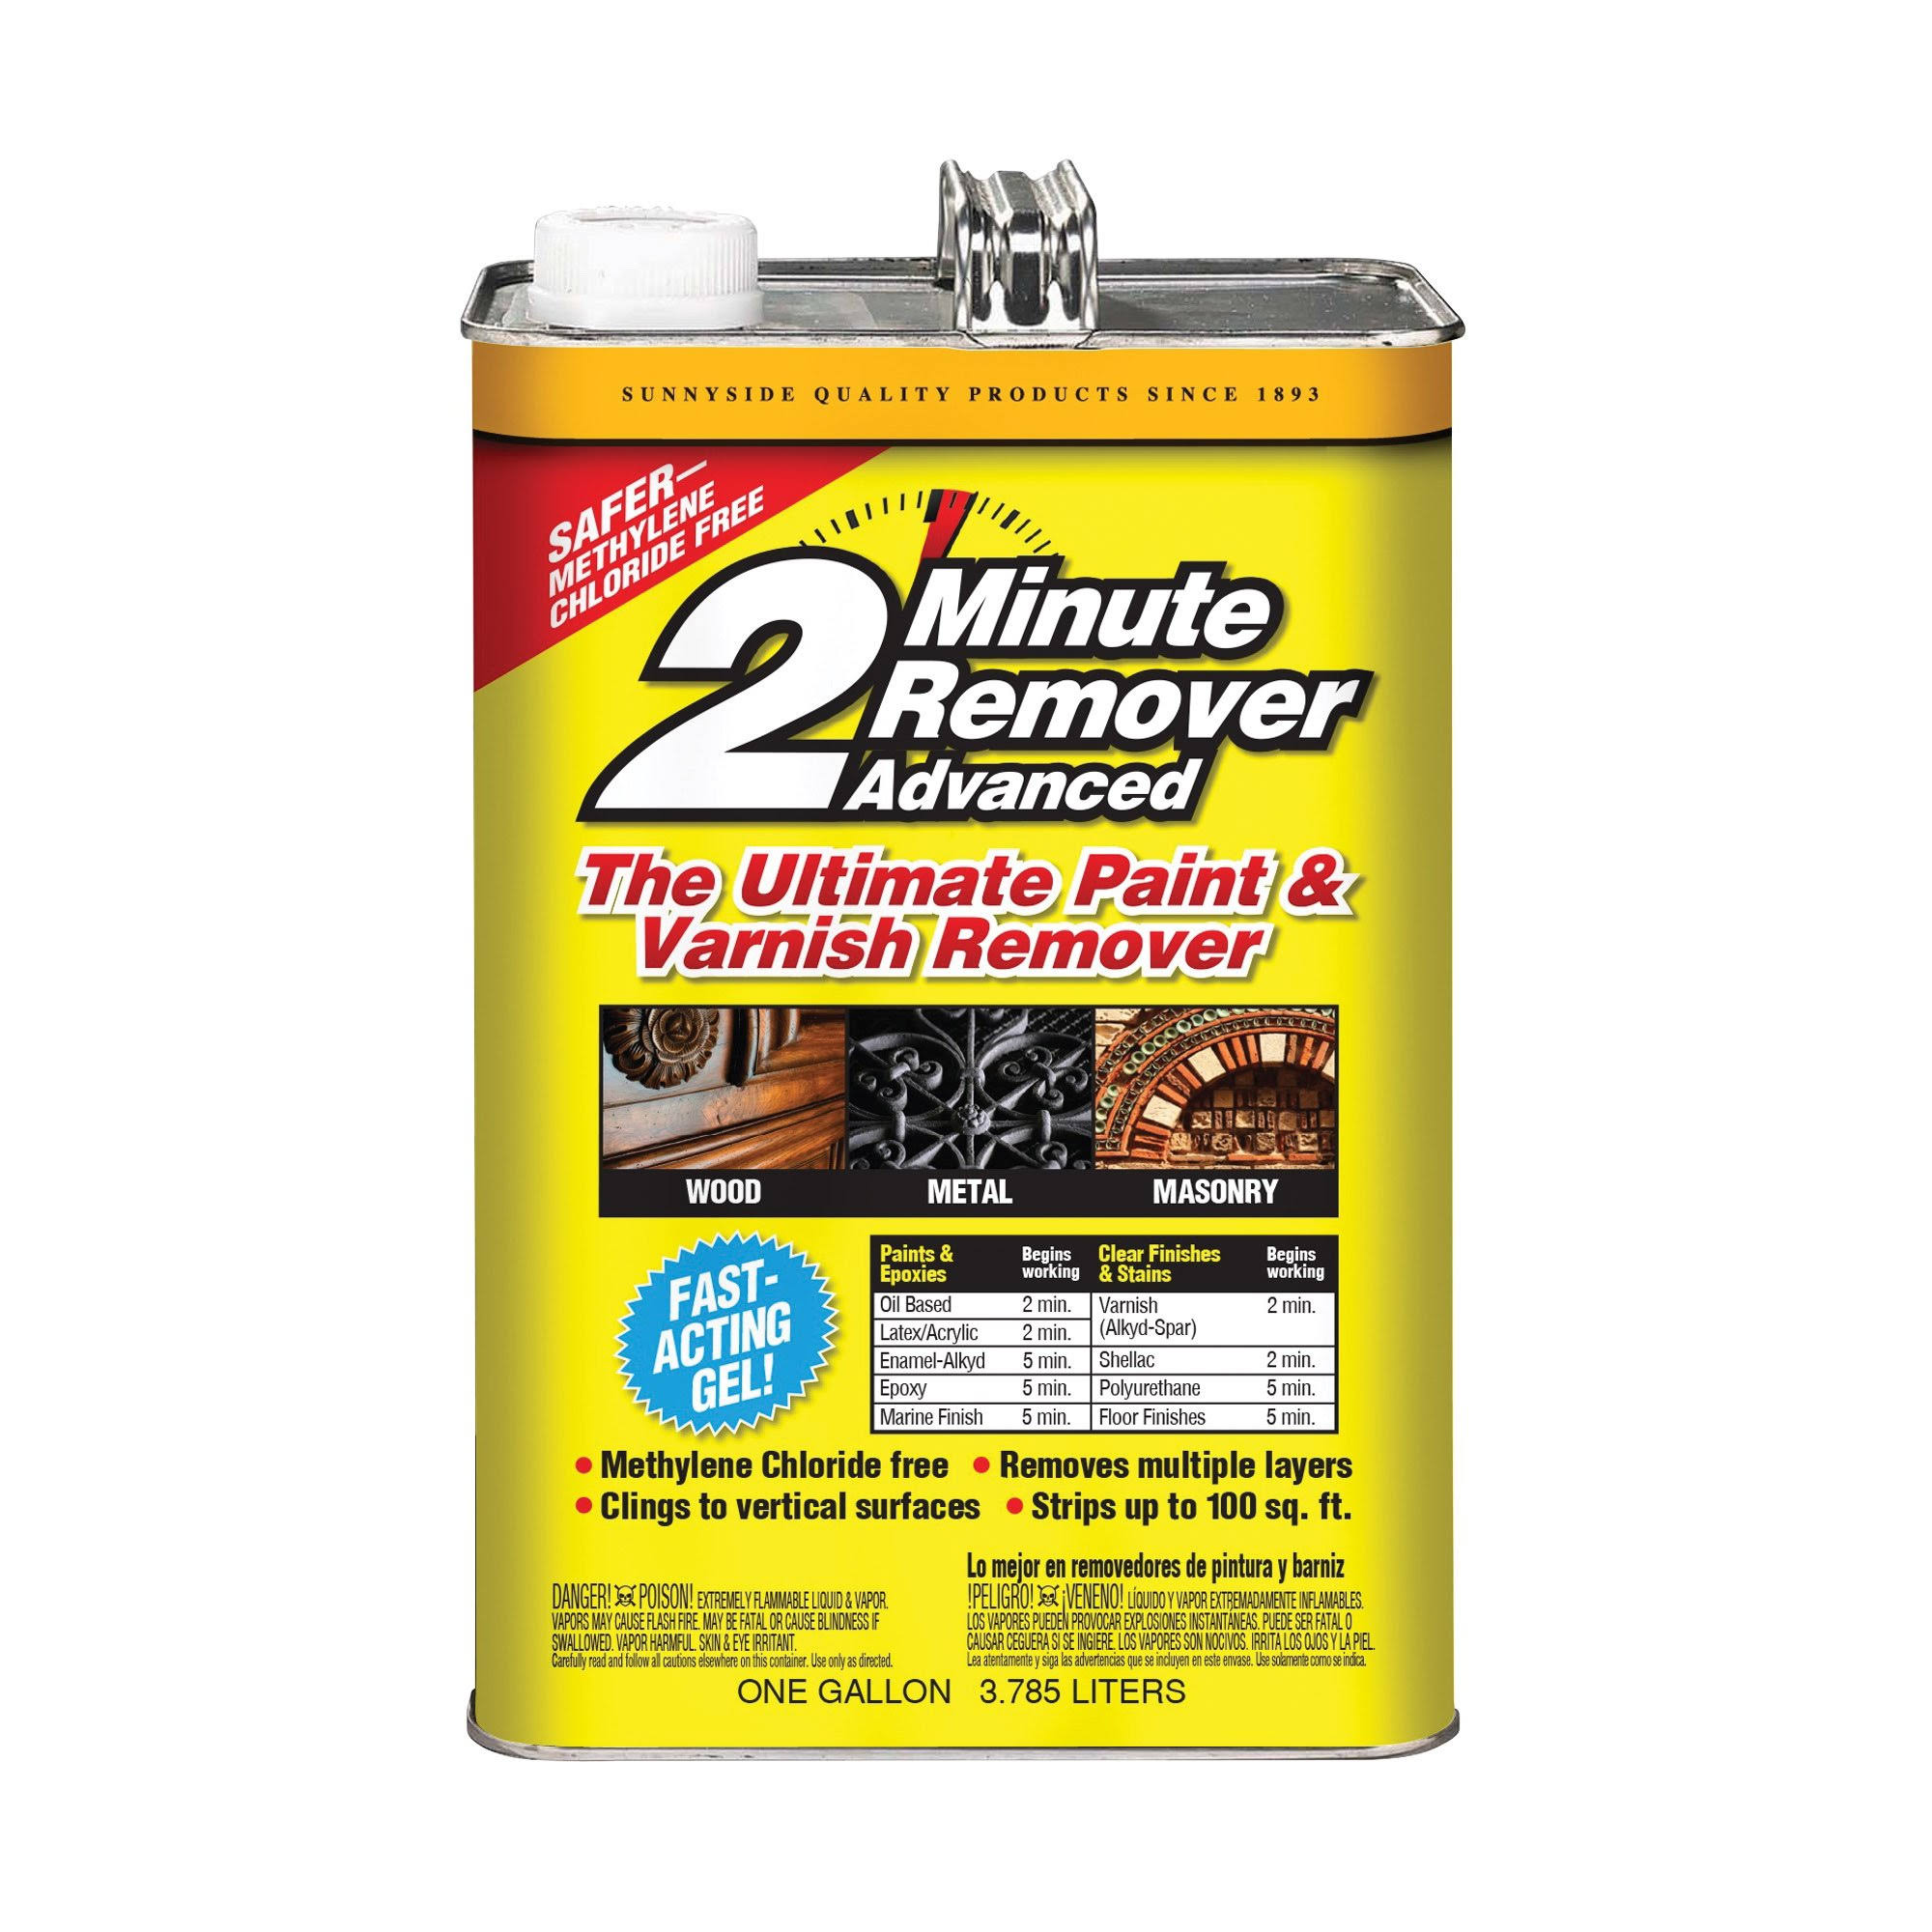 Sunnyside 2 Minute Remover Advanced Paint and Varnish Remover - 1gal